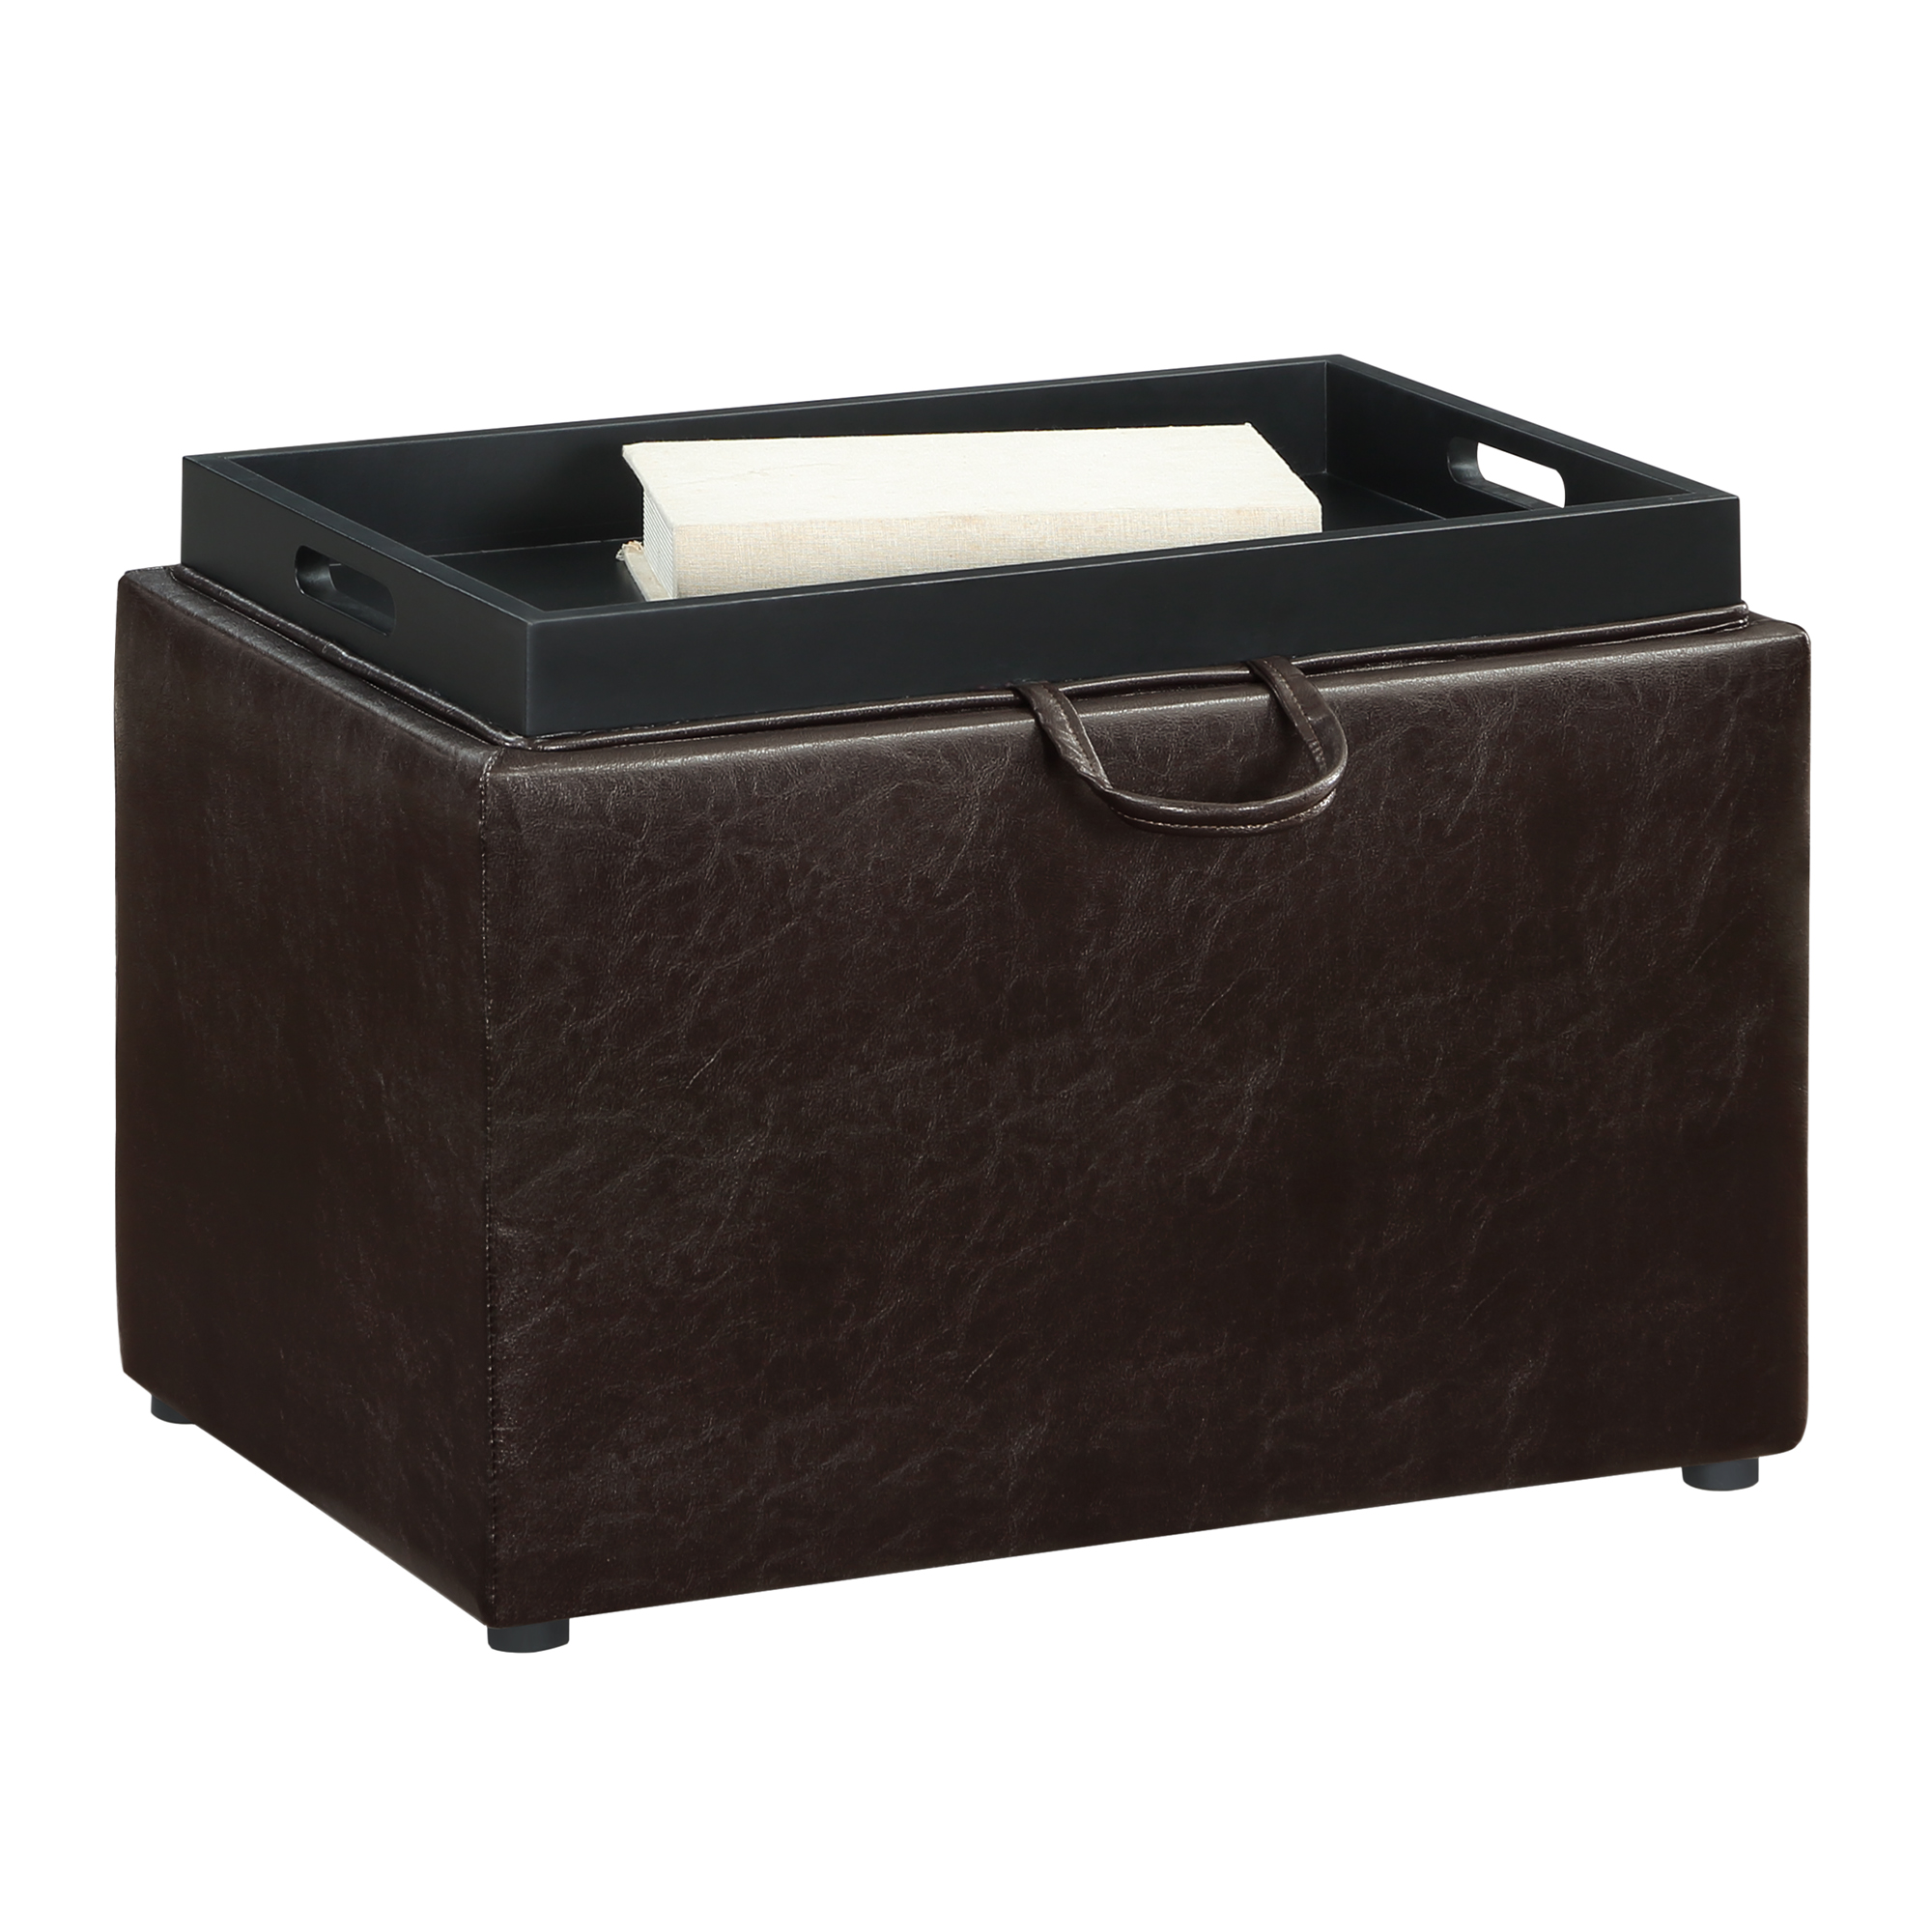 Convenience Concepts Designs4Comfort Accent Storage Ottoman with Reversible Tray, Espresso Faux Leather - image 5 of 8